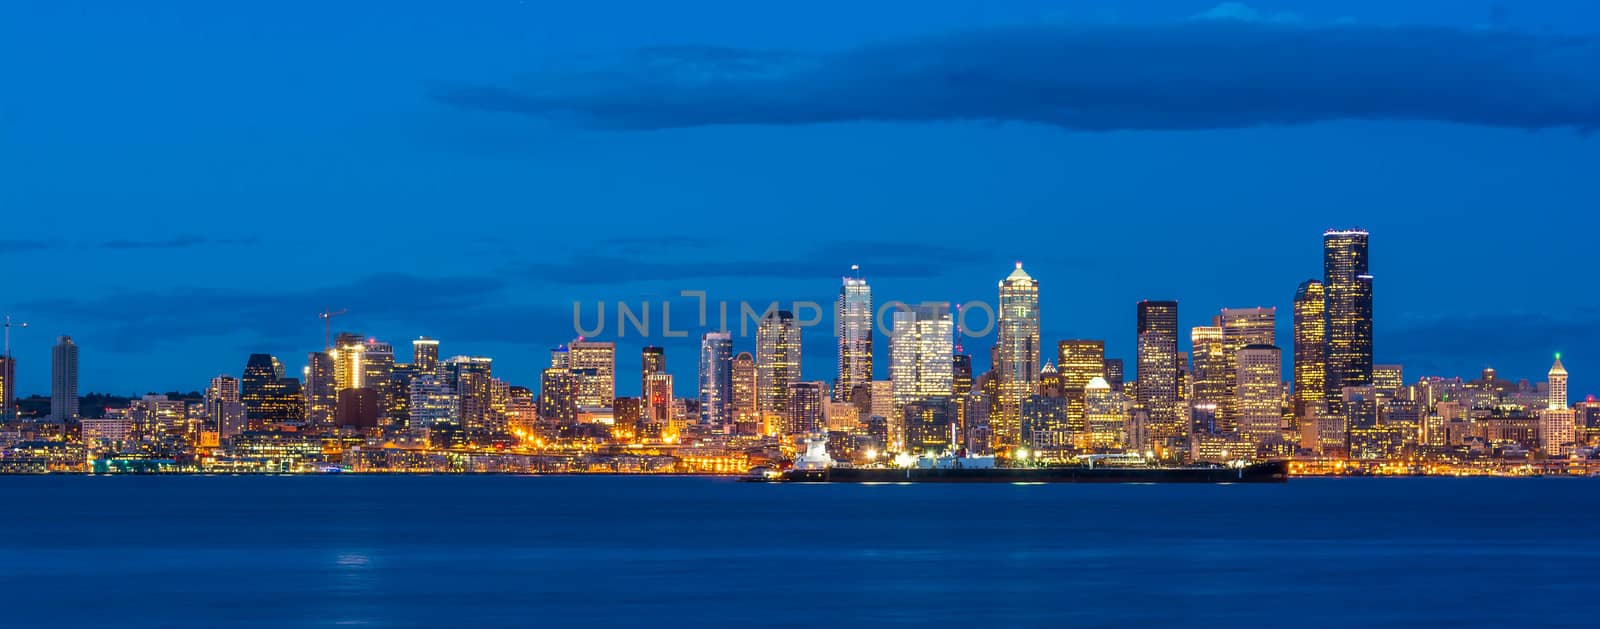 Seattle Skyline from Alki Point During the Blue Hour by cestes001